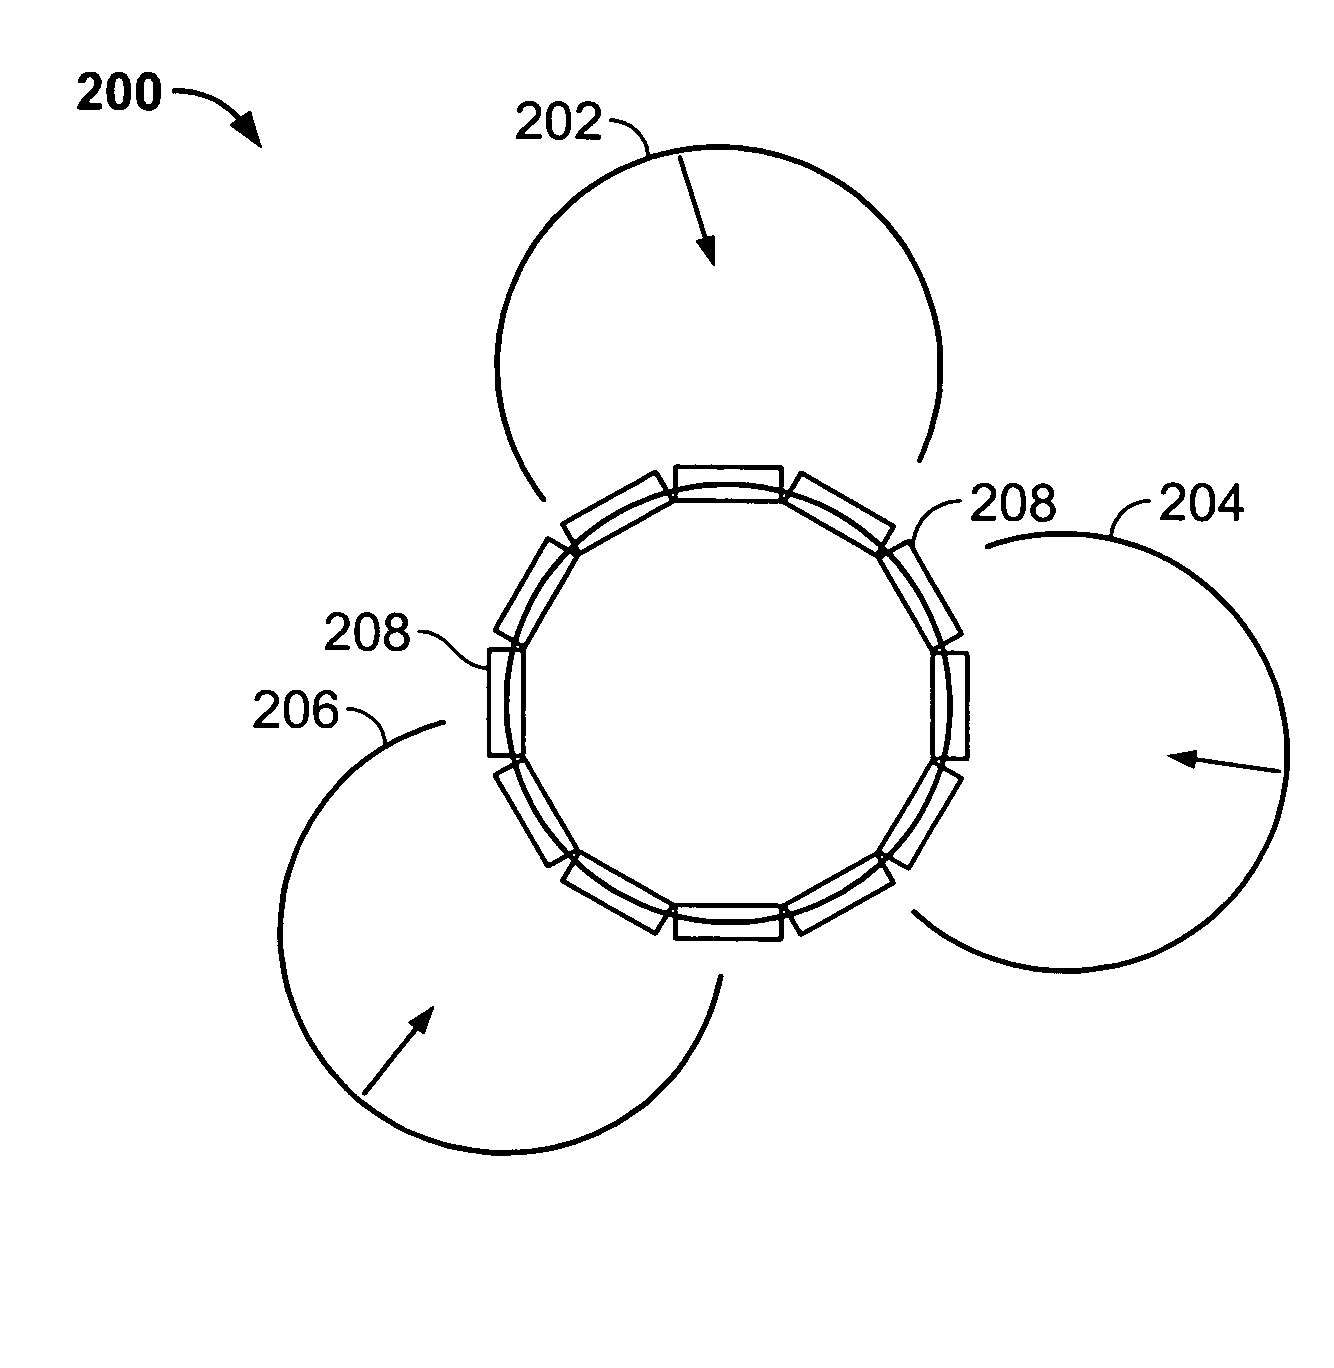 Medical devices having MEMs functionality and methods of making same